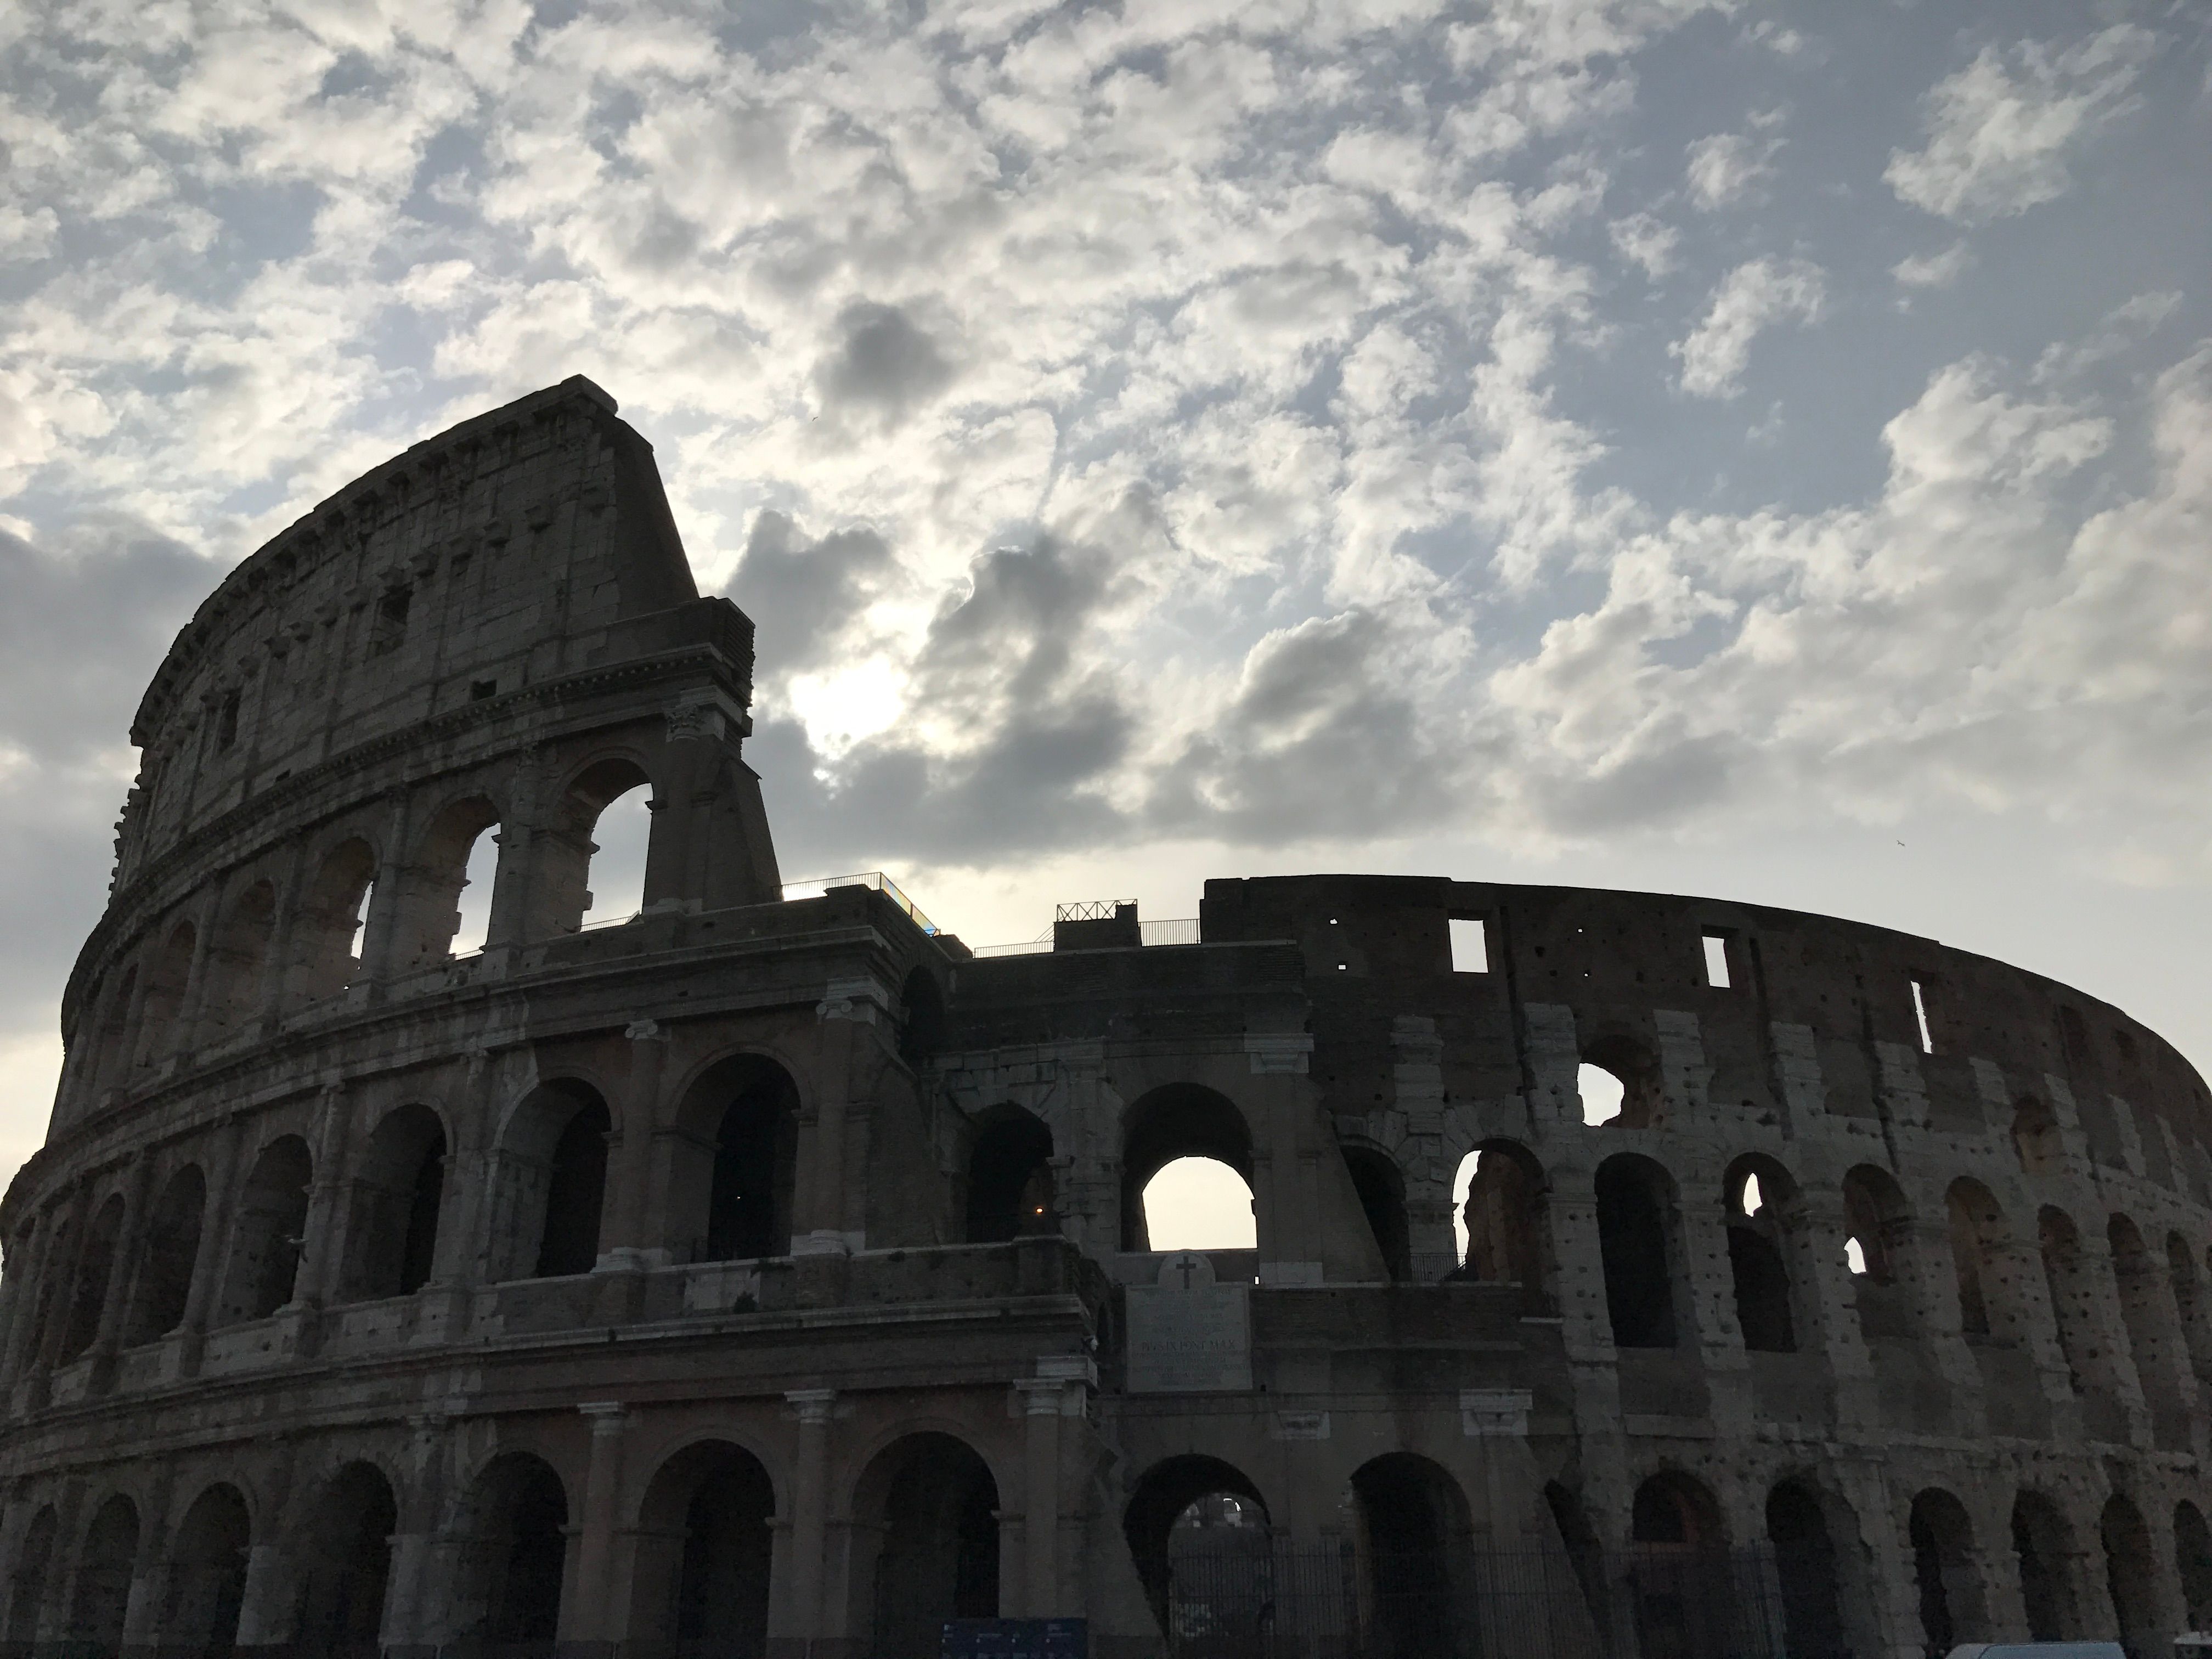 The Colosseum, captured by Local Guide MortenSI